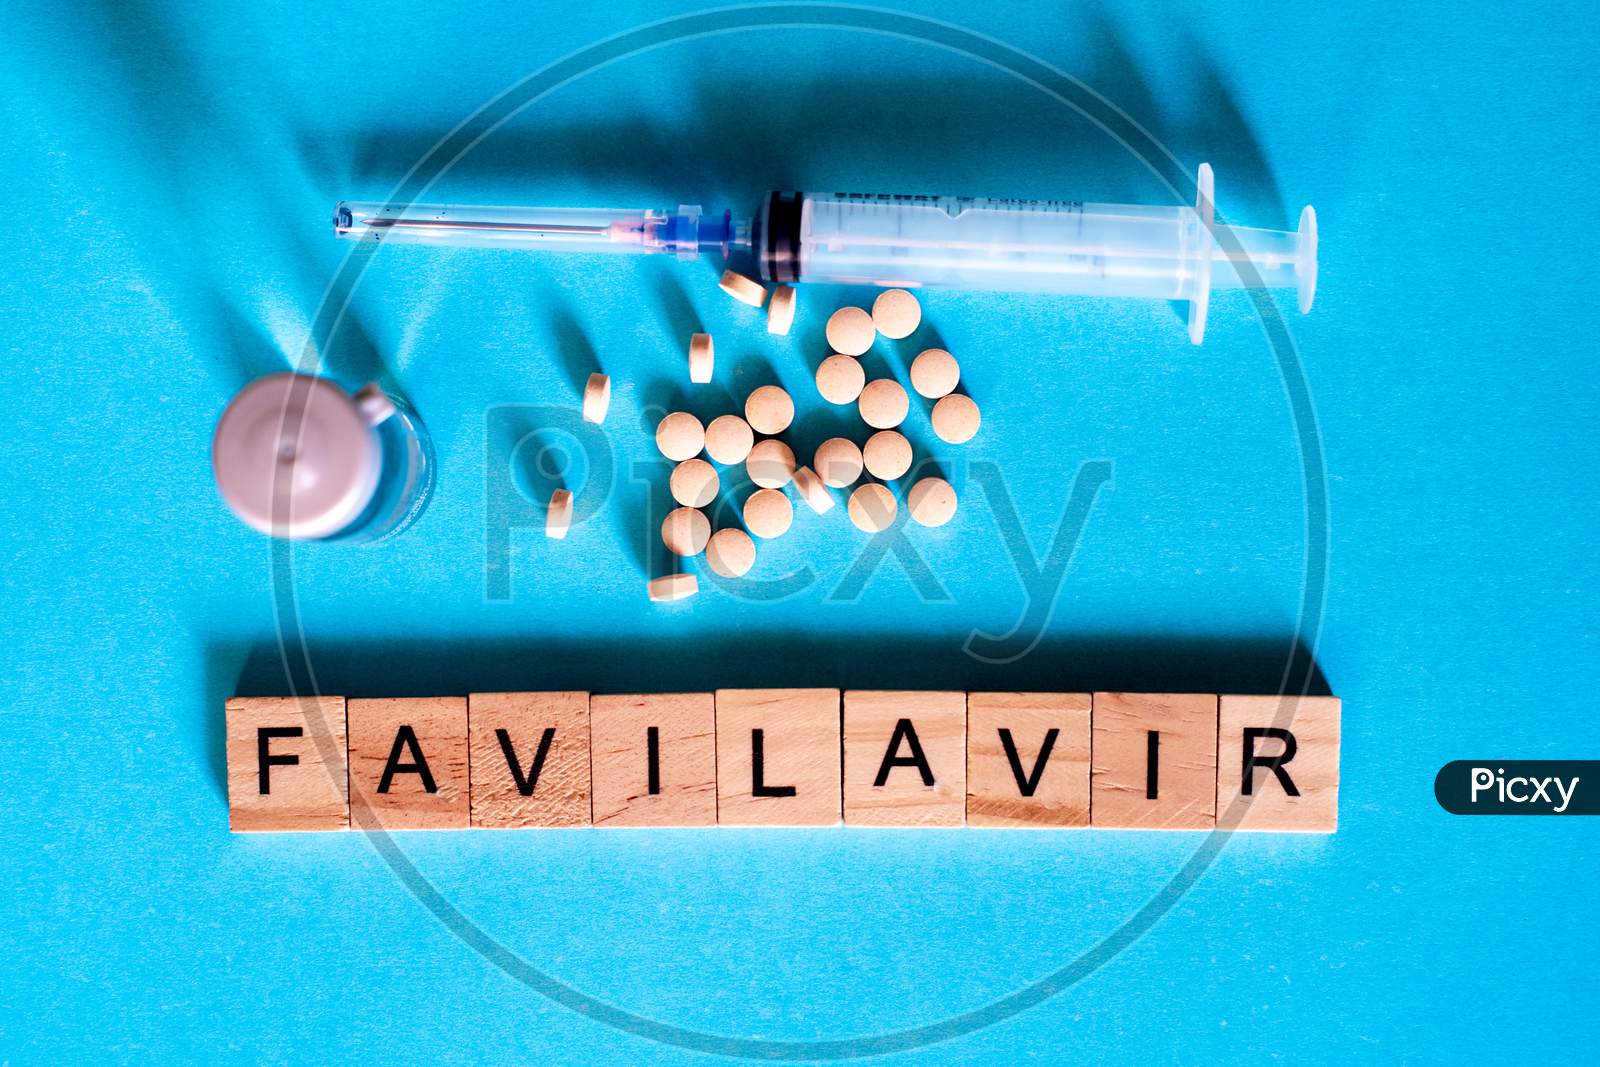 Shot Of Tablets, Glass Bottle, Syringe On Blue And Wooden Blocks With Favilavir The Antiviral Drug Used For Covid19 Coronavirus Written On It. Shows One Of The Key Drugs Being Tested To Cure Coronavirus Patients